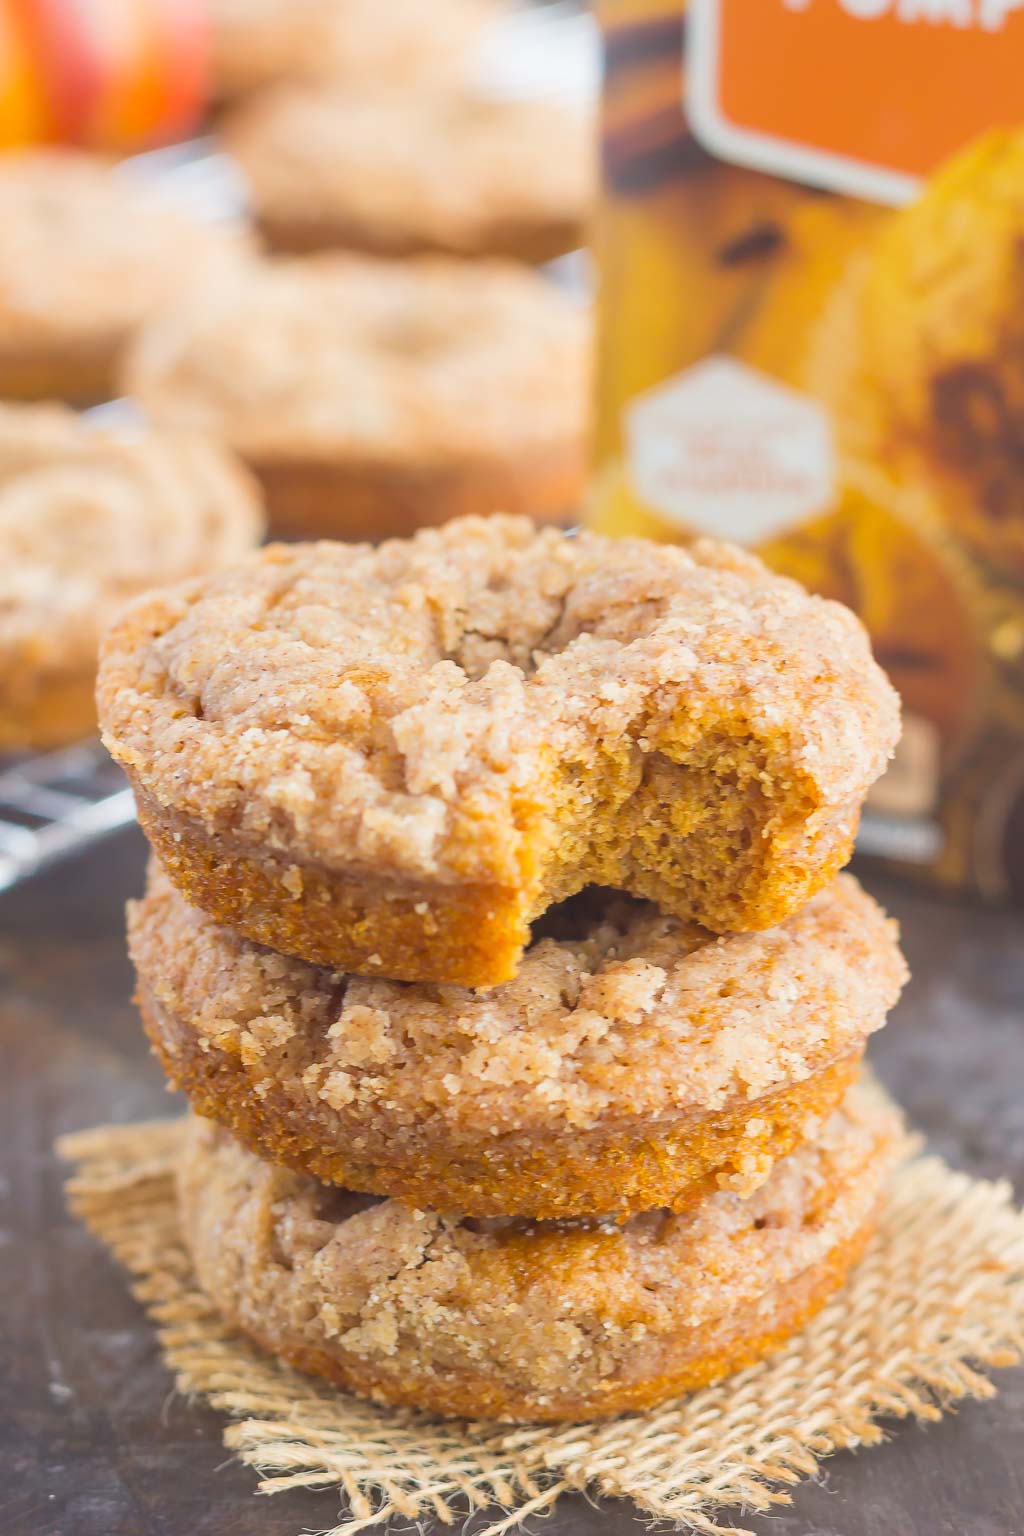 These Baked Pumpkin Streusel Donuts are soft, fluffy, and bursting with pumpkin. Filled with cozy fall flavors and topped with a sweet cinnamon streusel, this easy treat is the perfect fall breakfast or dessert! #pumpkin #pumpkindonuts #bakeddonuts #donutrecipes #fallrecipe #pumpkinrecipe #fallbreakfast #falldessert #pumpkinbreakfast #pumpkindessert #breakfast #dessert